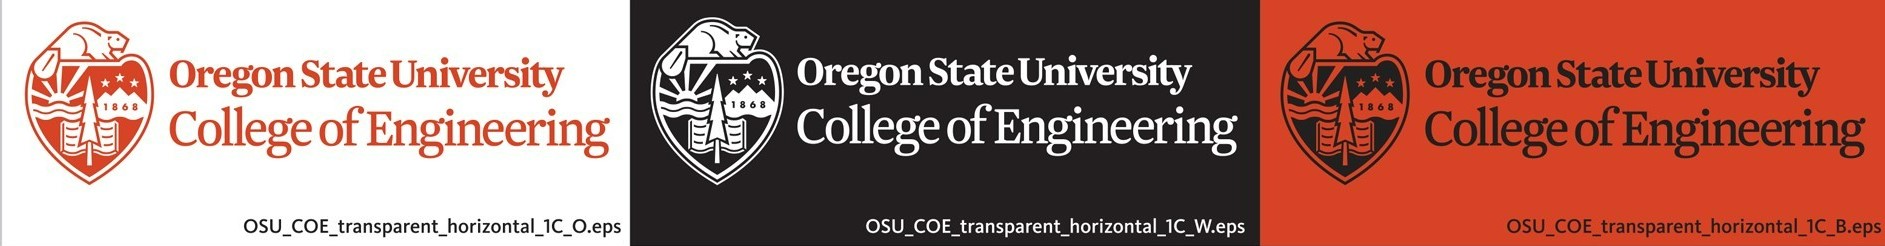 3 examples of College of Engineering logo with the crest and text all one color over a background. Orange text with white background, white text with black background and black text with orange background